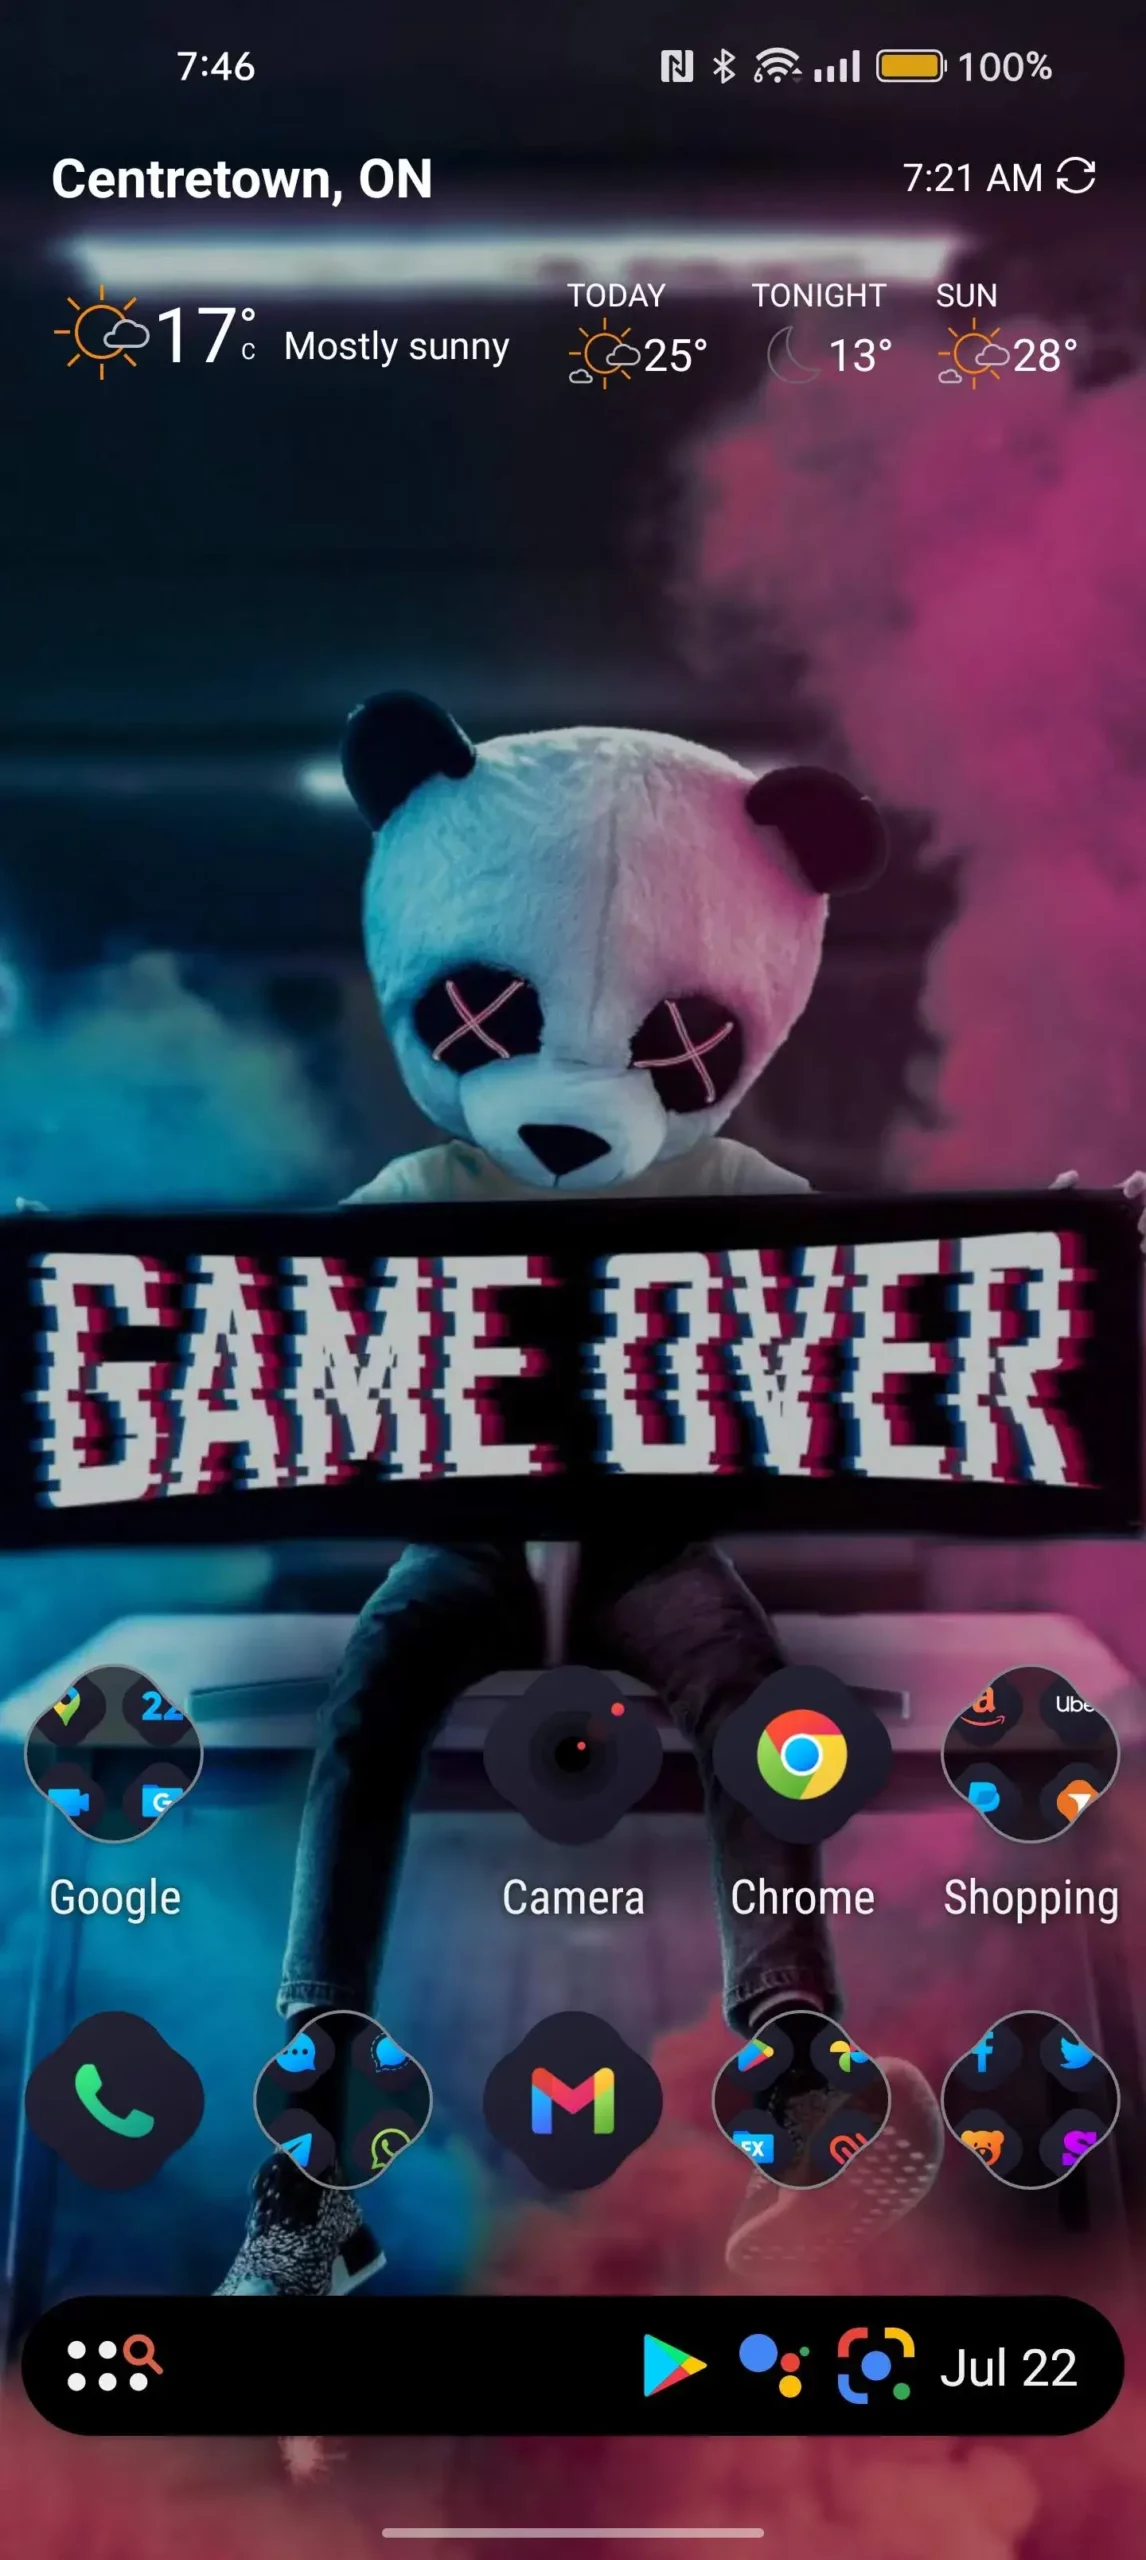 Upgrade Your Android Experience with Nova Launcher - Review Home Screen